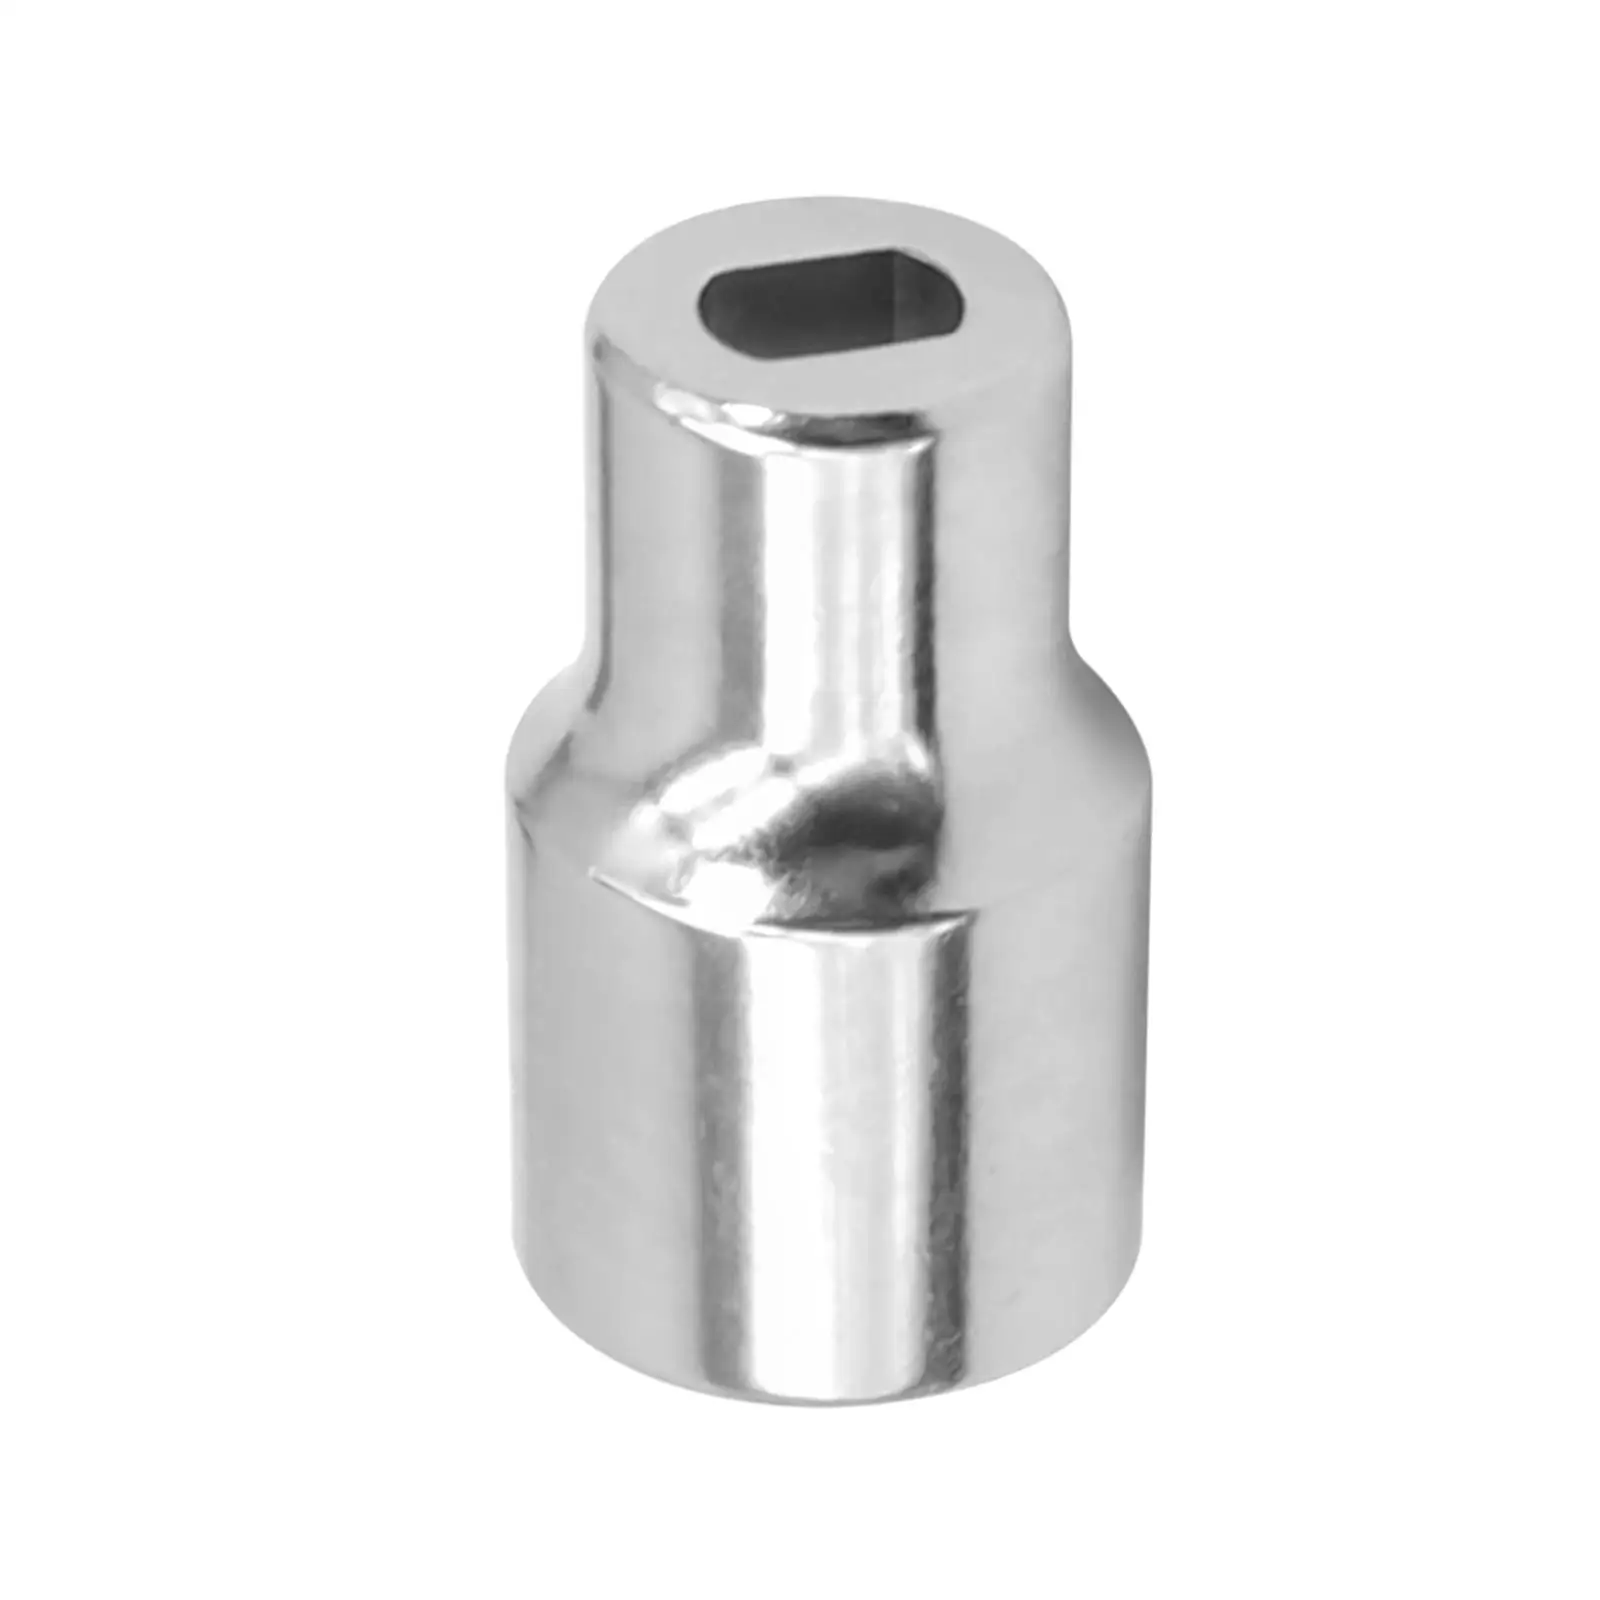 25284 Shock Absorber Socket  Replace Absorbers Fit the  Stem Tools for Cars, high reliability and high performance